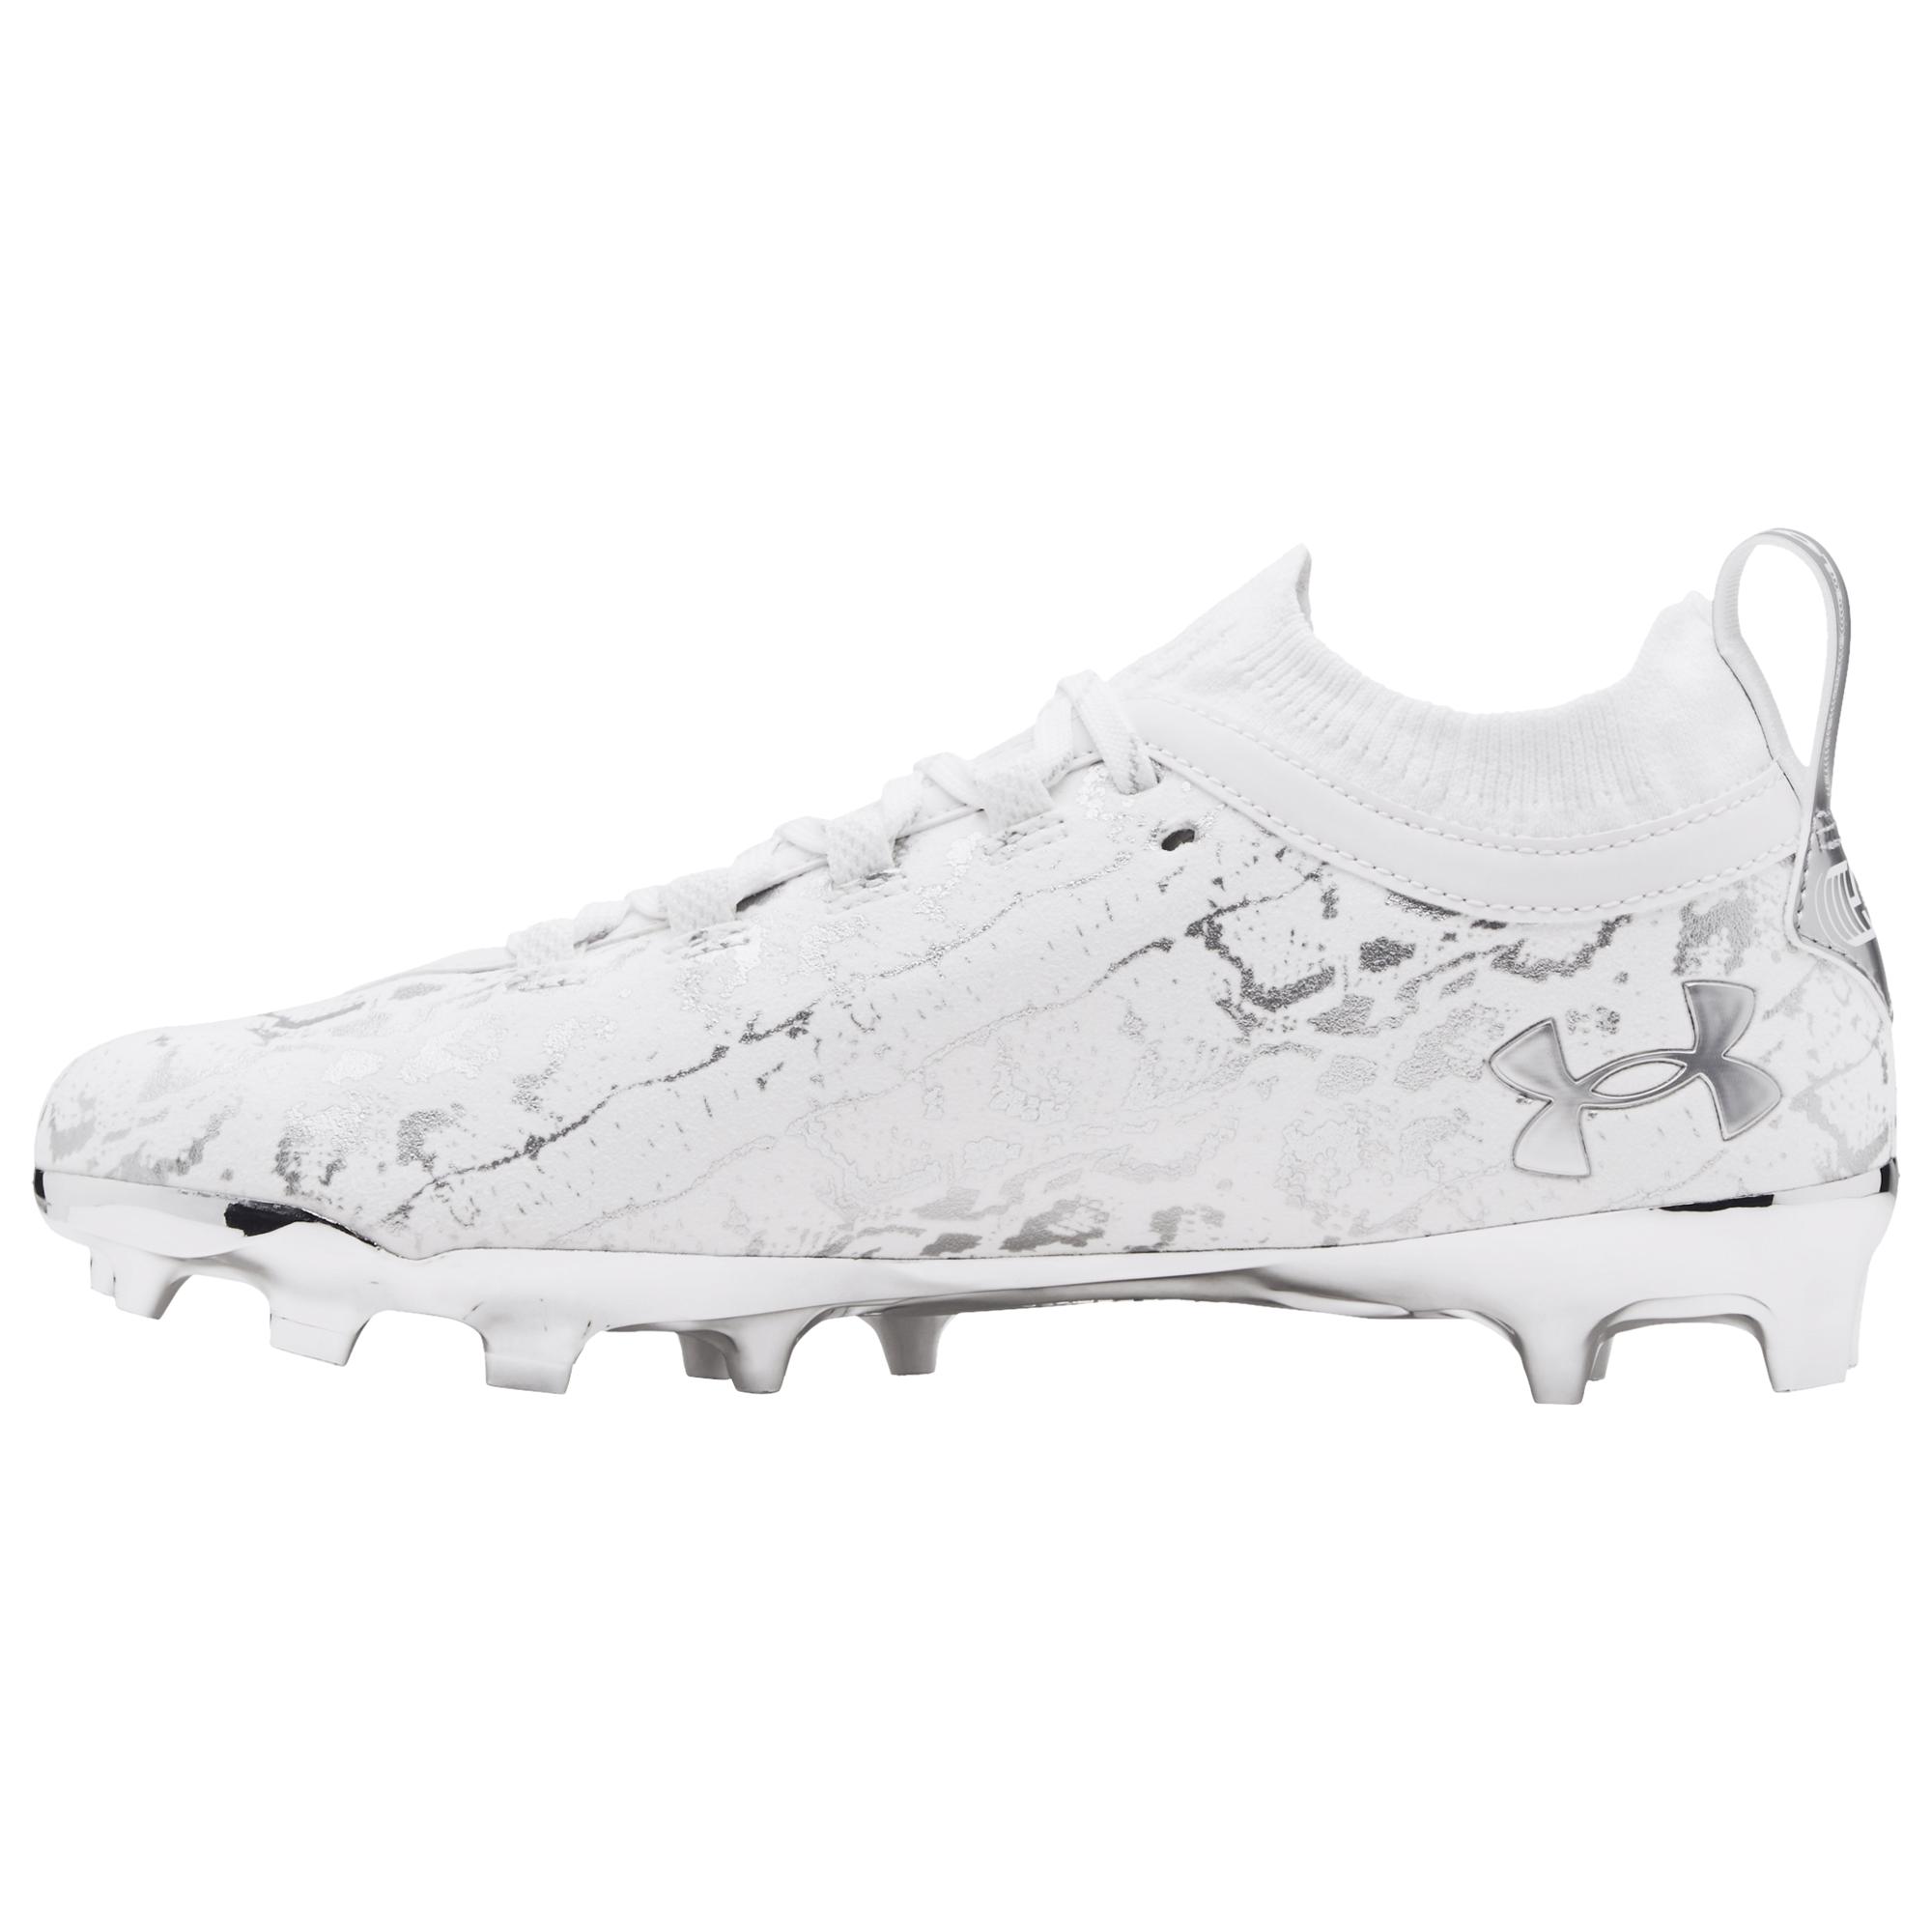 Under Armour Spotlight Football Cleats Mens Football Low Top Boots NEW 